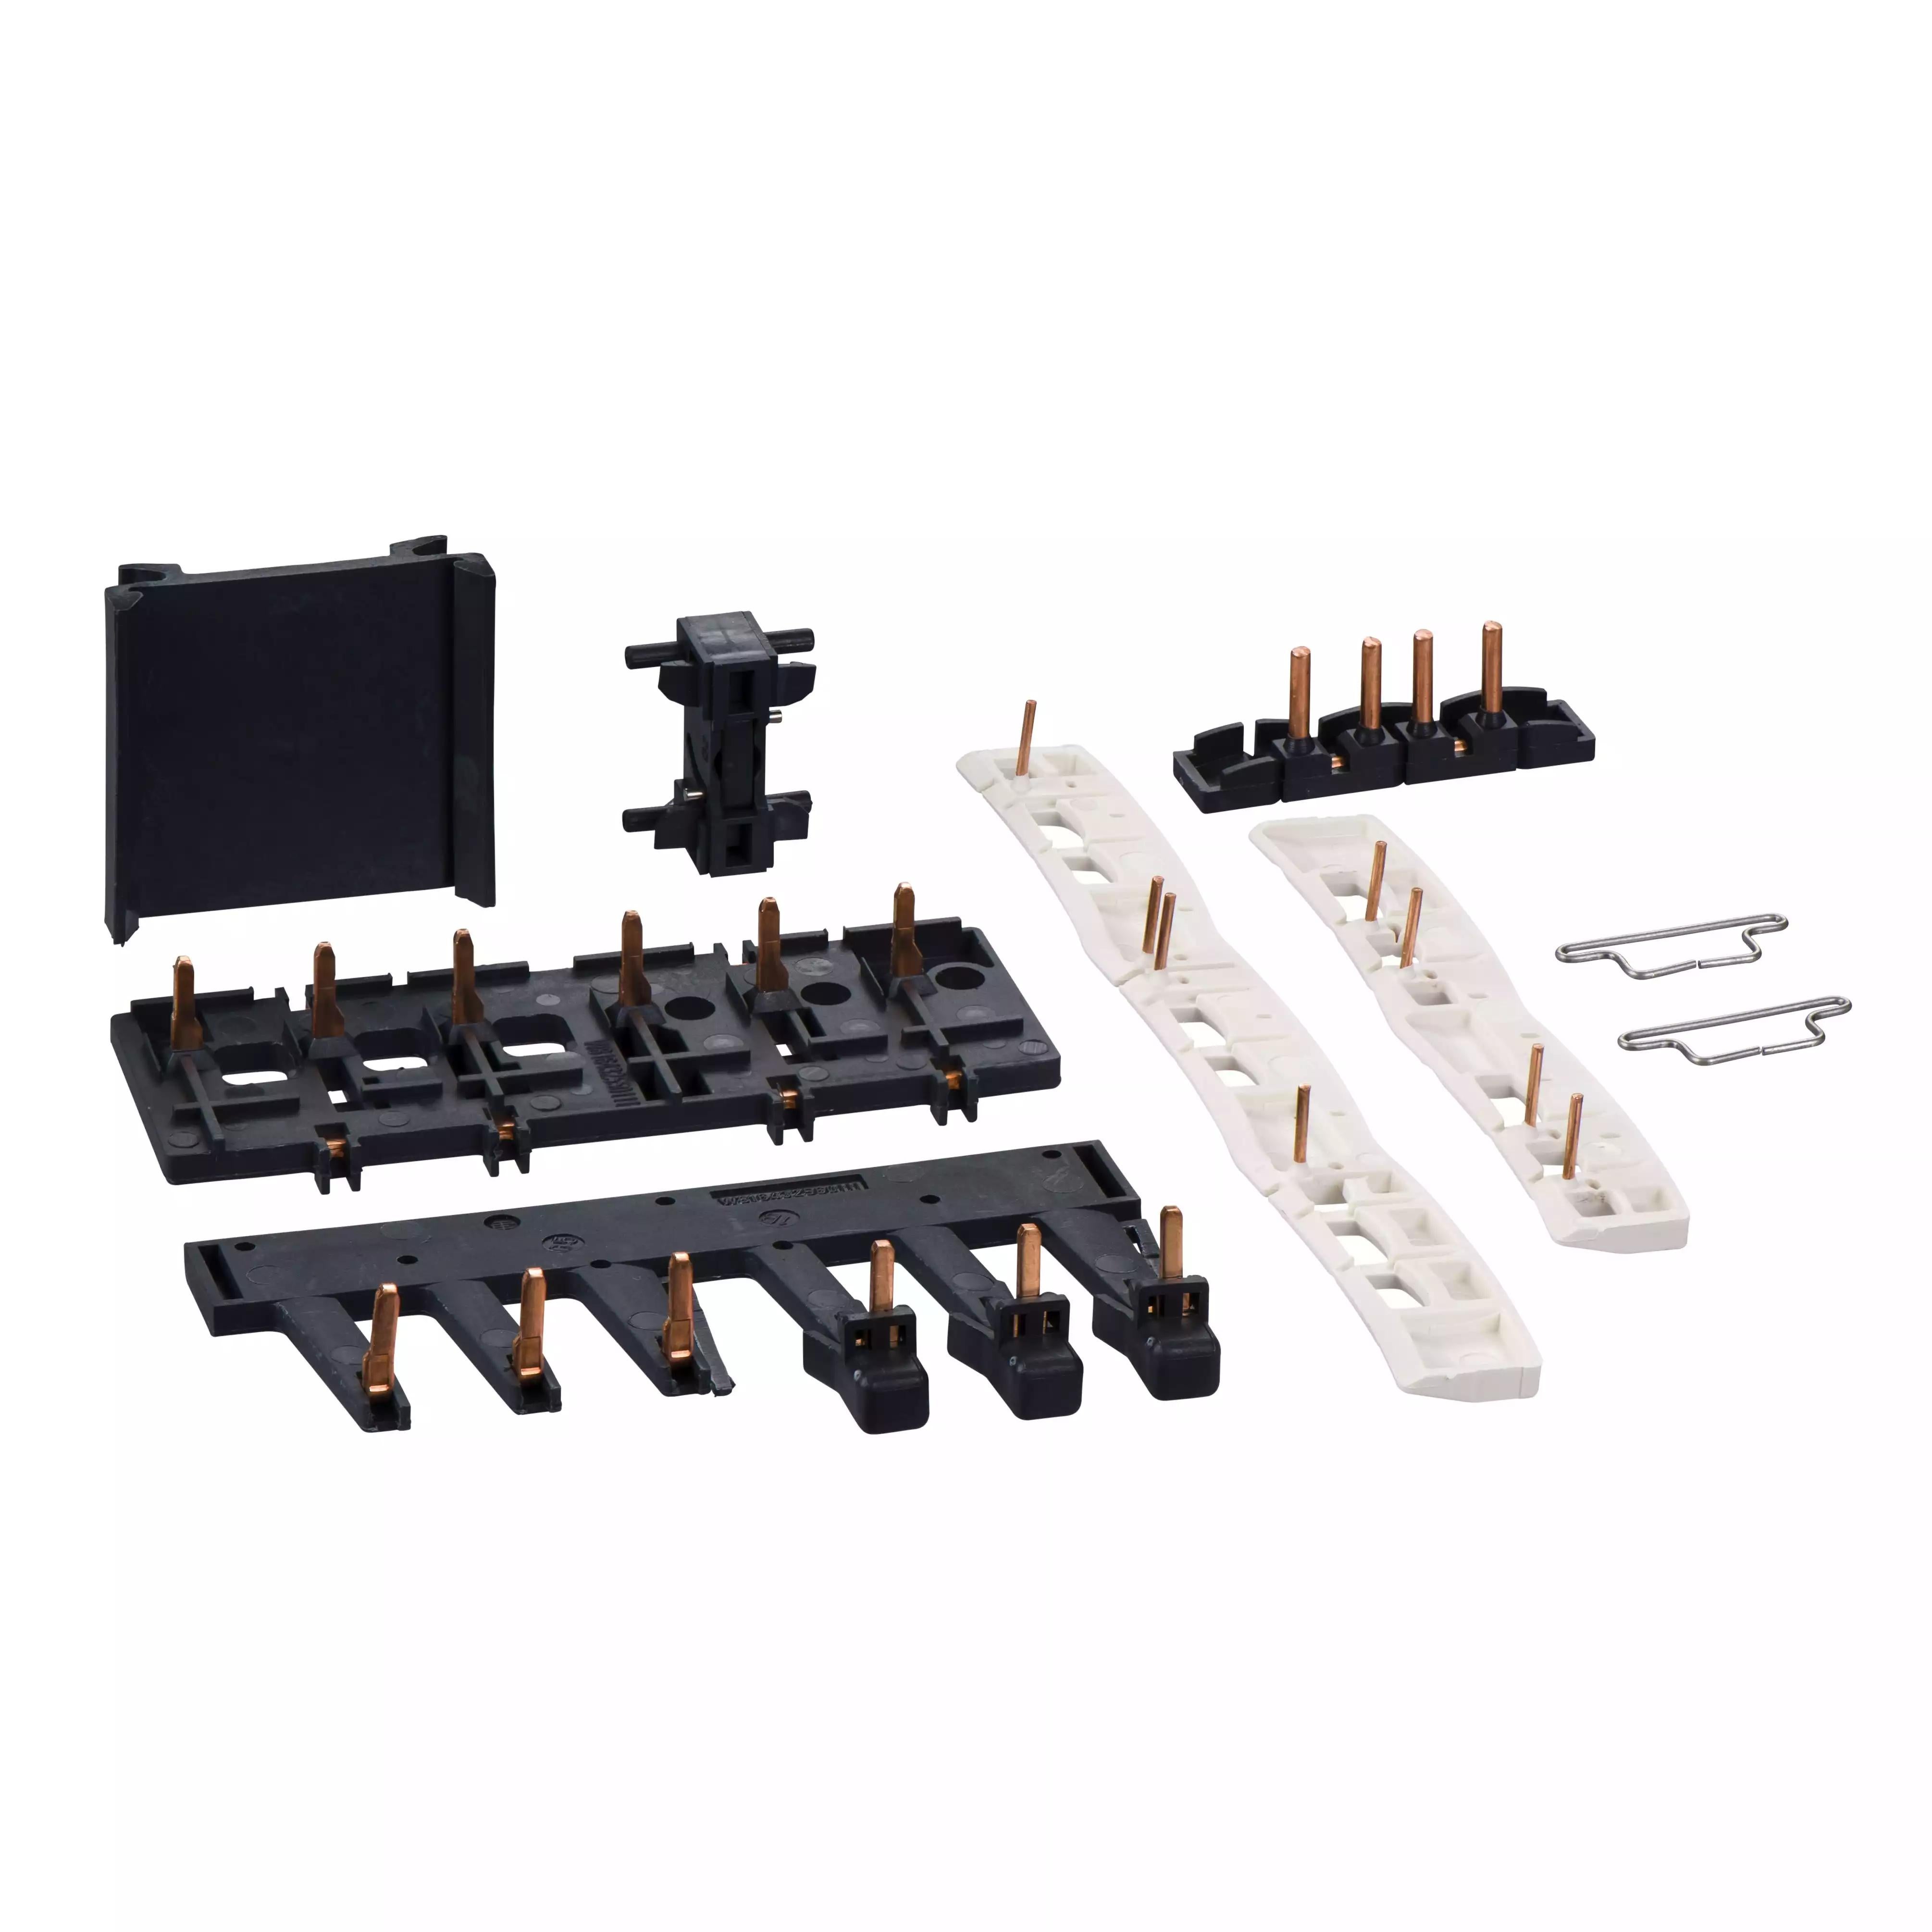 Kit for star delta starter assembling, for 2 x contactors LC1D25-D38 and star LC1D09-D18, without timer block